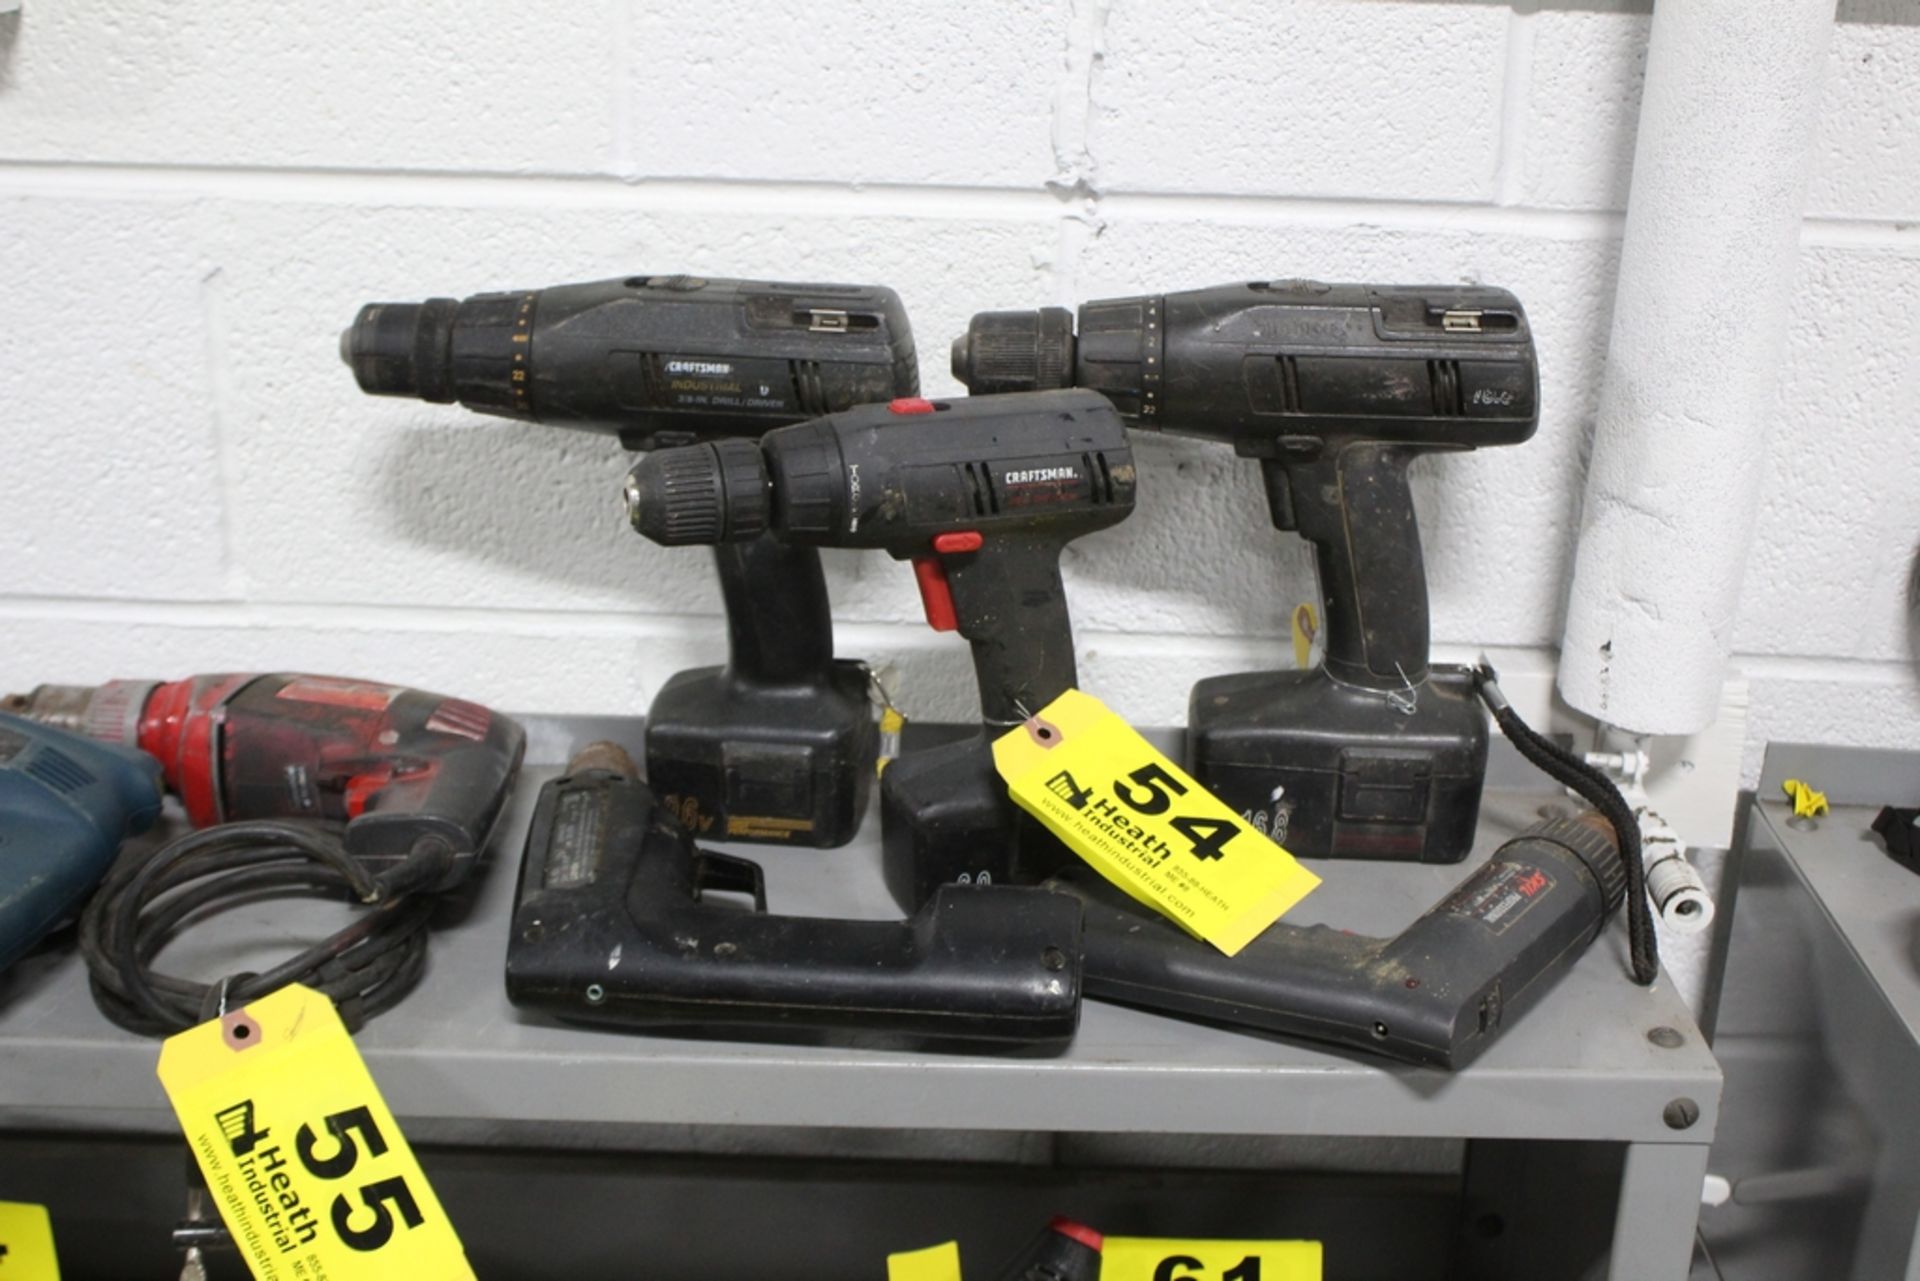 (3) CRAFTSMAN, (1) SKIL & (1) BLACK & DECKER CORDLESS DRILL DRIVERS, NO CHARGERS